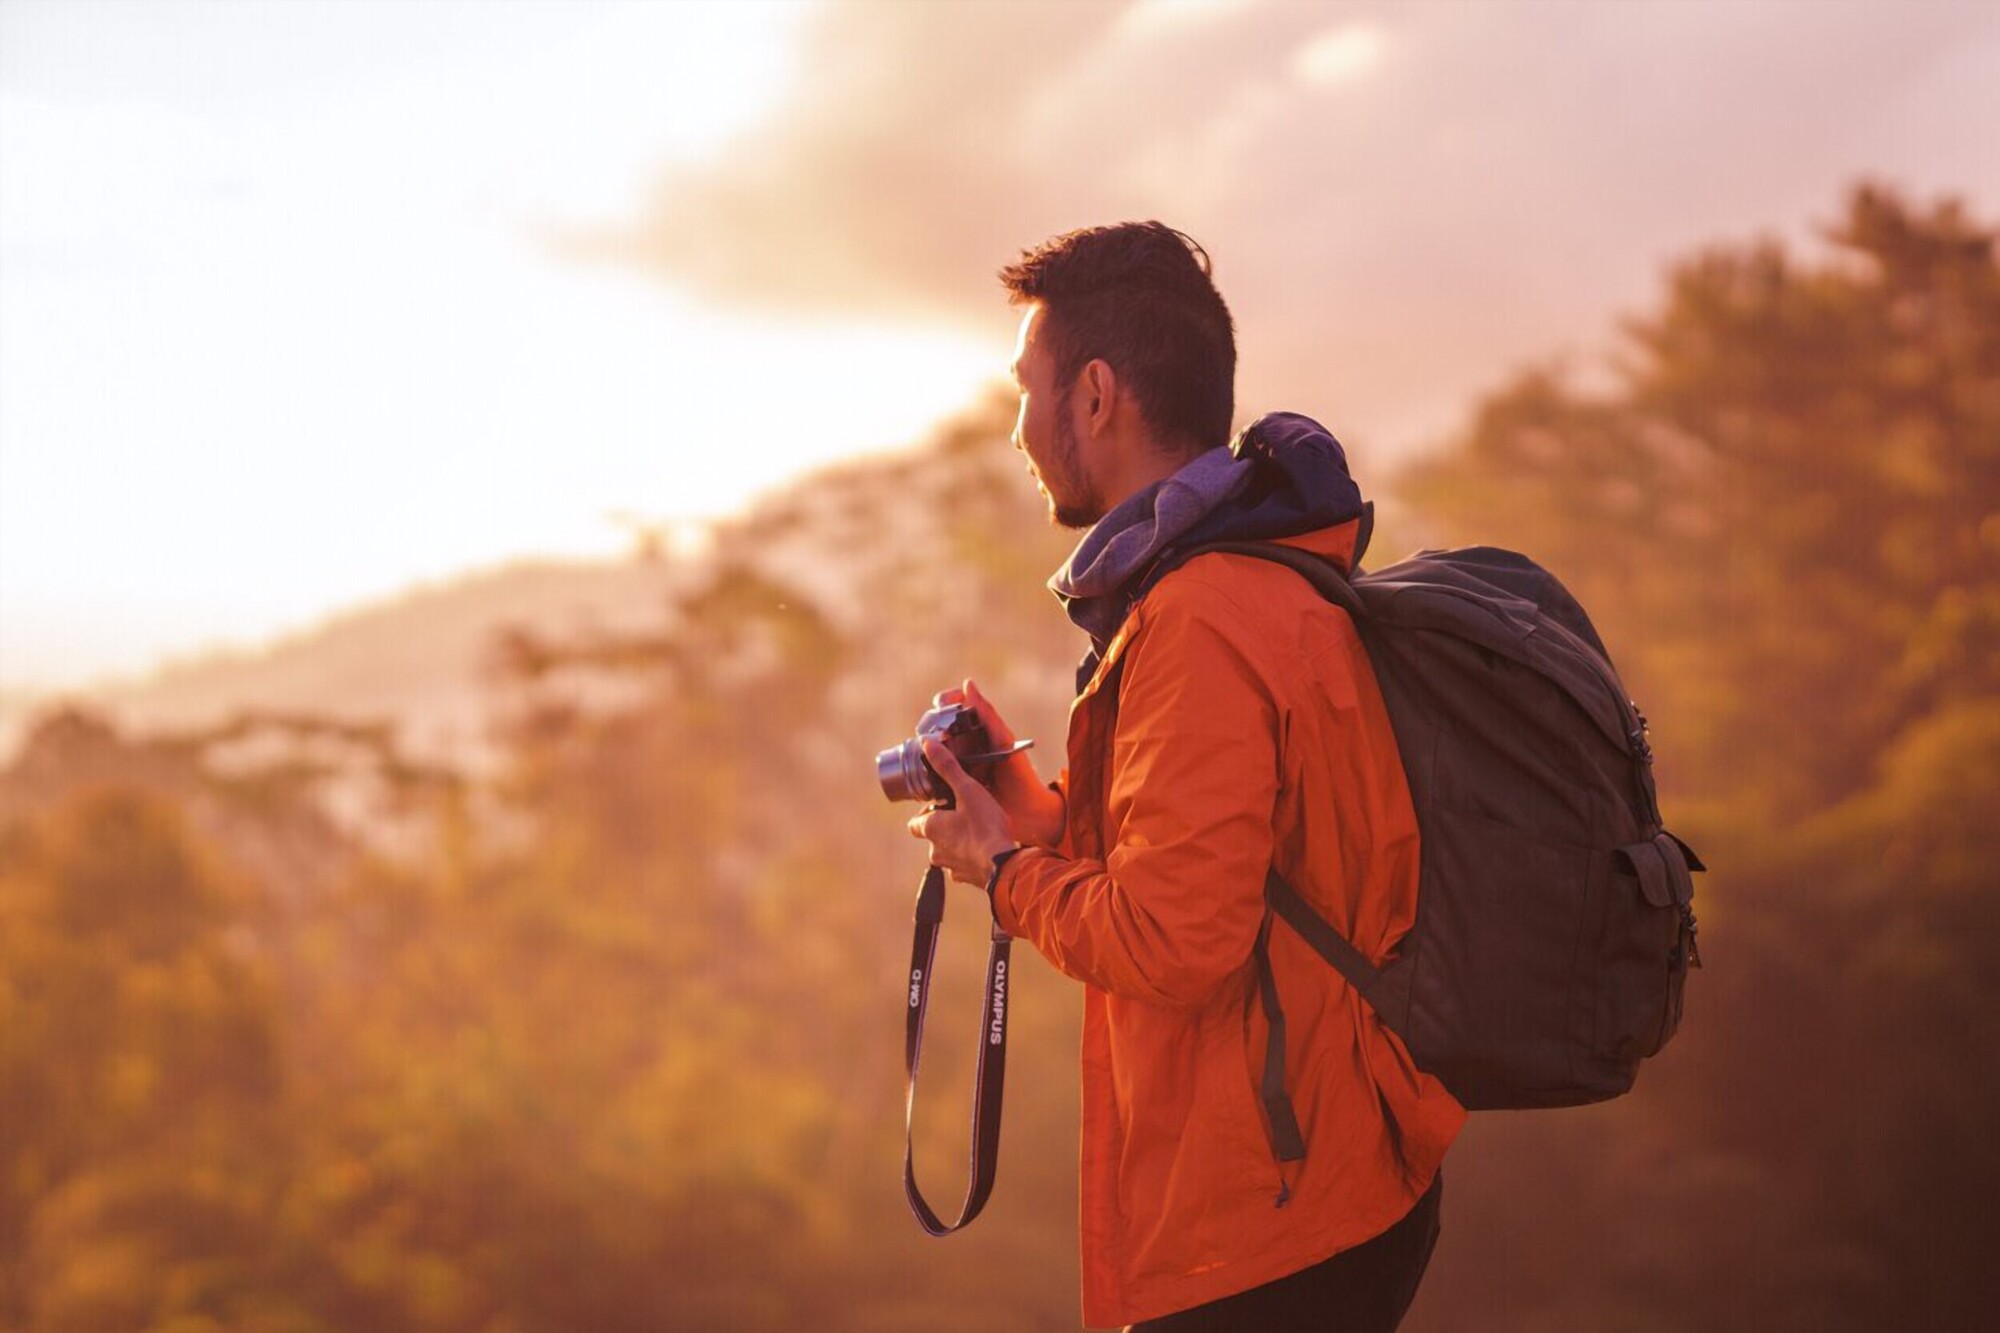 10 Best Camera for Hiking, Backpacking, and